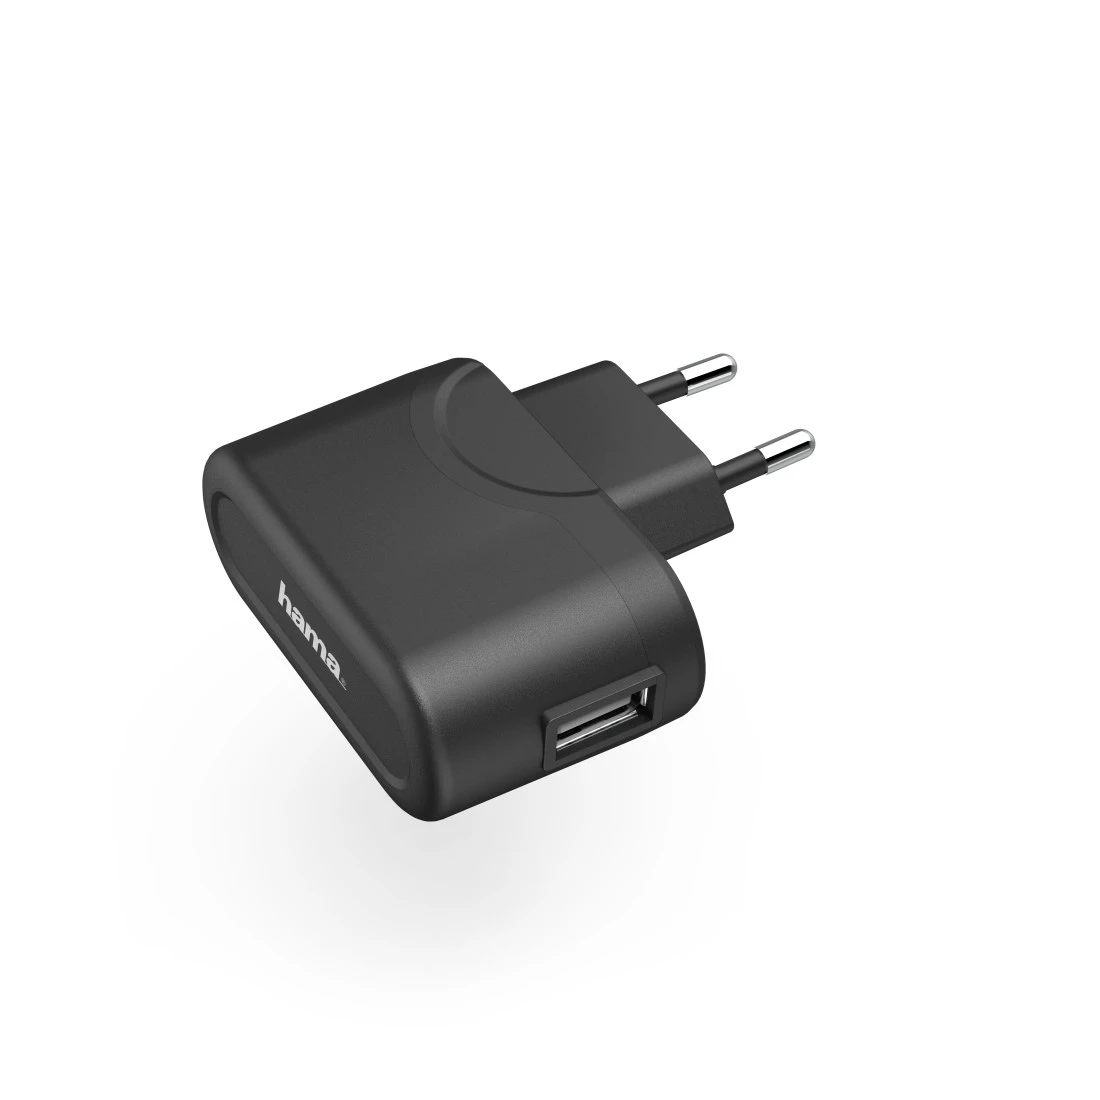 CHARGEUR USB 5V/1A ( BOITIER )